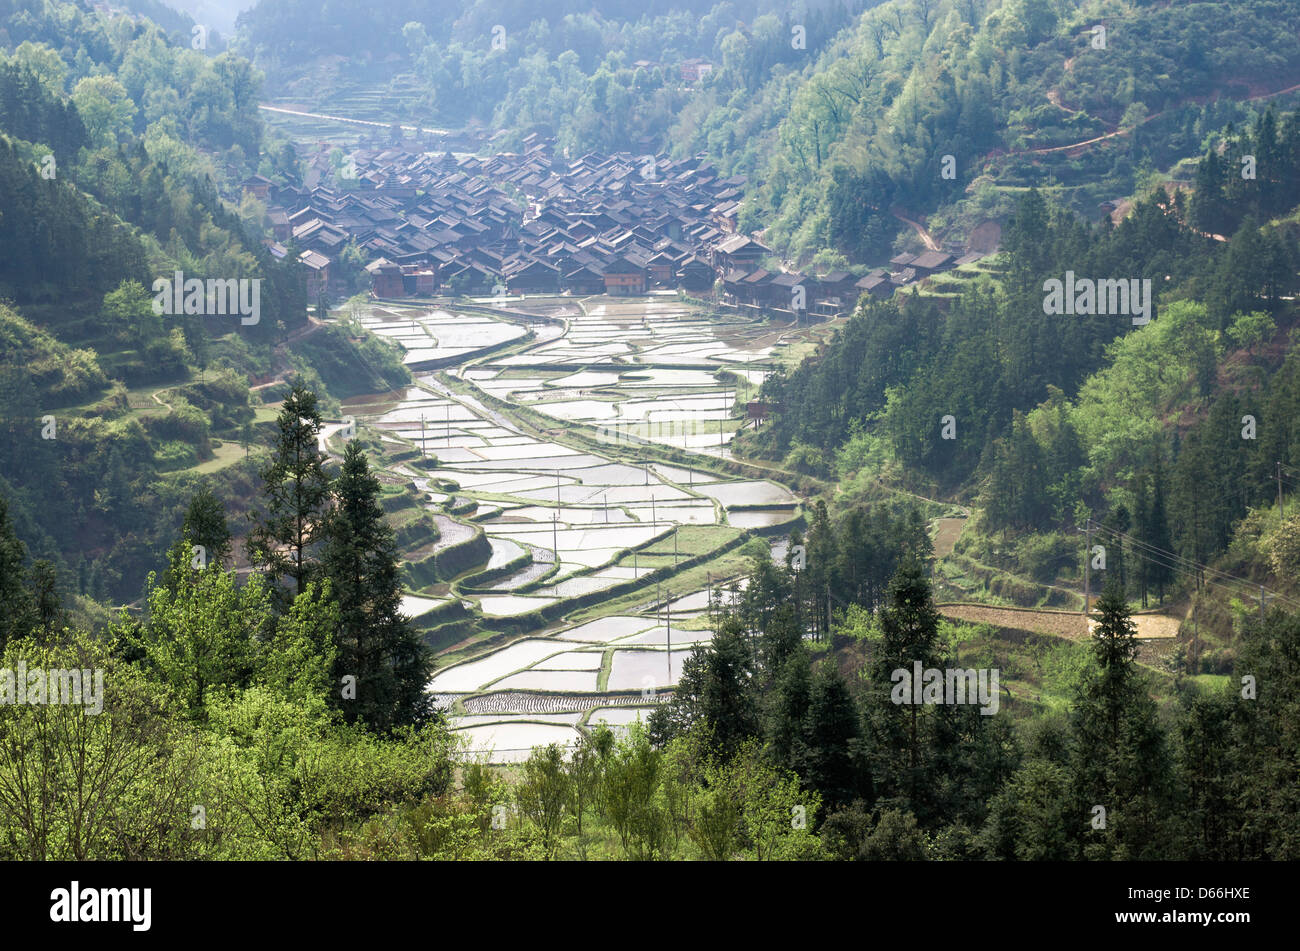 Zhaoxing village and farms in the Guizhou province of China Stock Photo